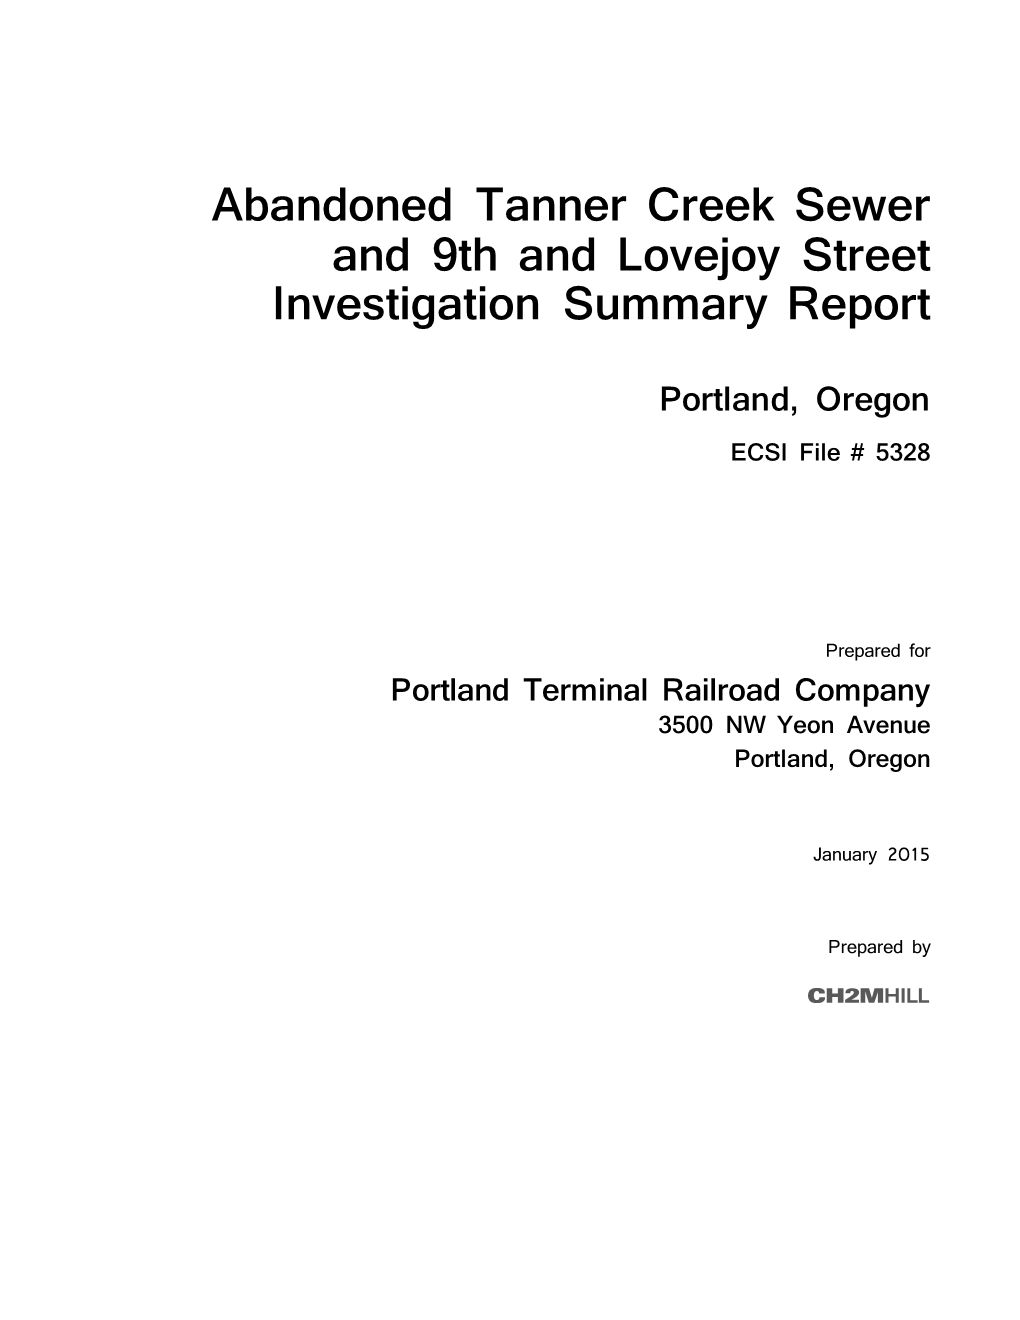 Abandoned Tanner Creek Sewer and 9Th and Lovejoy Street Investigation Summary Report